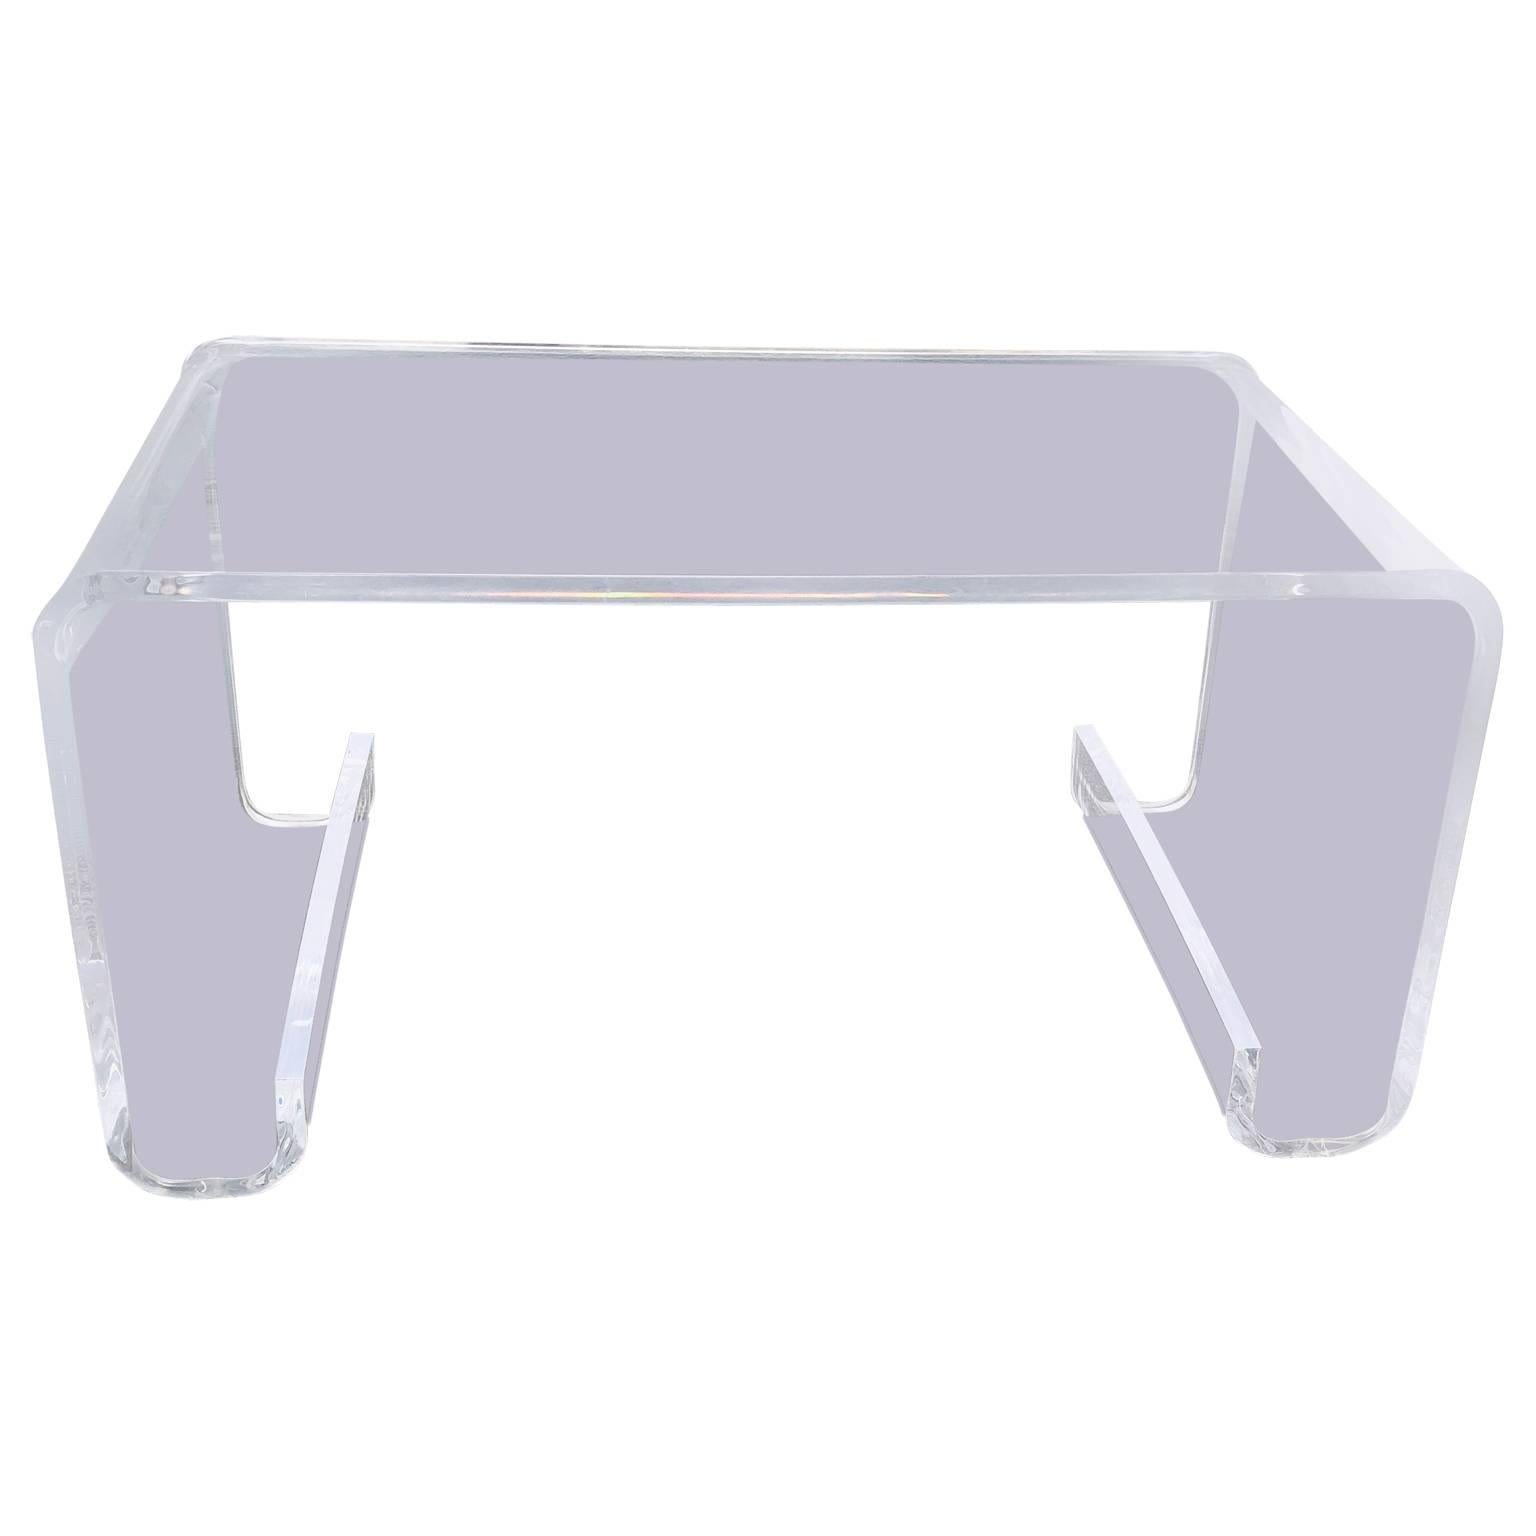 Lucite waterfall cocktail table in the manner of Hollis Jones. This exquisite rectangular Mid-Century Modern table sports thick lucite. The table is sturdy and will make a wonderful addition to a modern decor. 



 